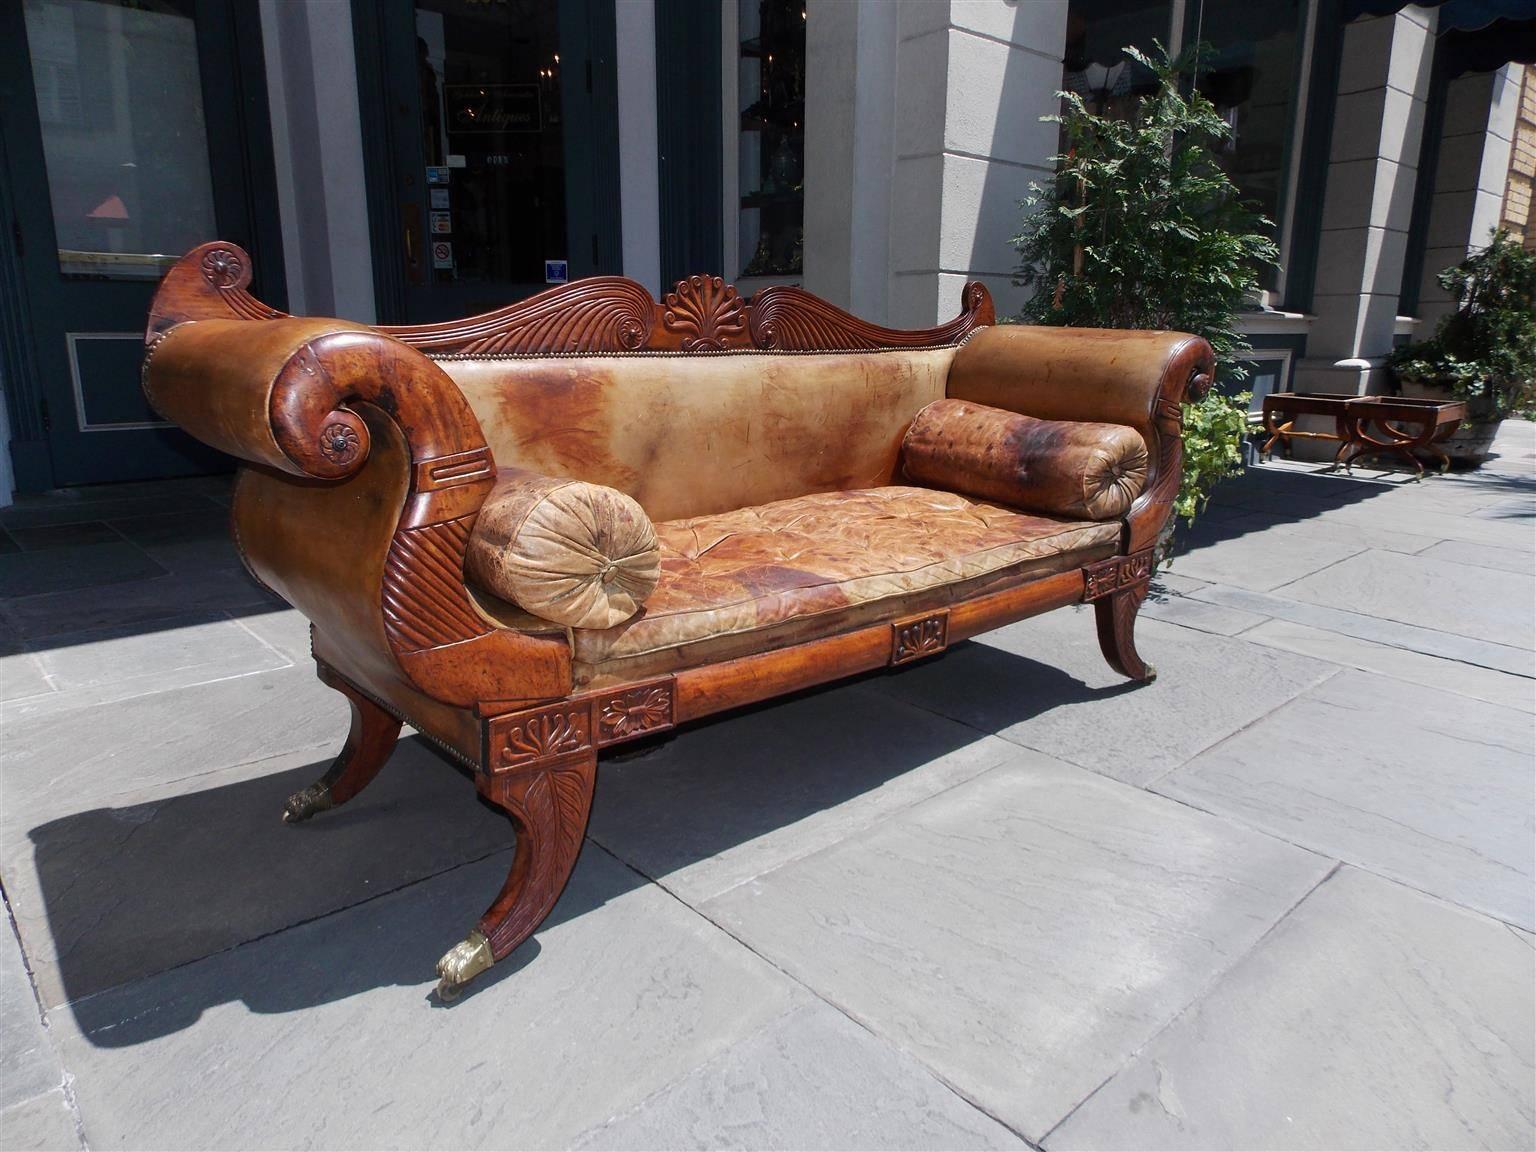 Caribbean Regency mahogany leather sofa with a central serpentine and scrolled fluted back, central floral shell with flanking scrolled medallions, flanking fluted carved arms with bolster side pillows, carved molded edge foliage skirt, and resting